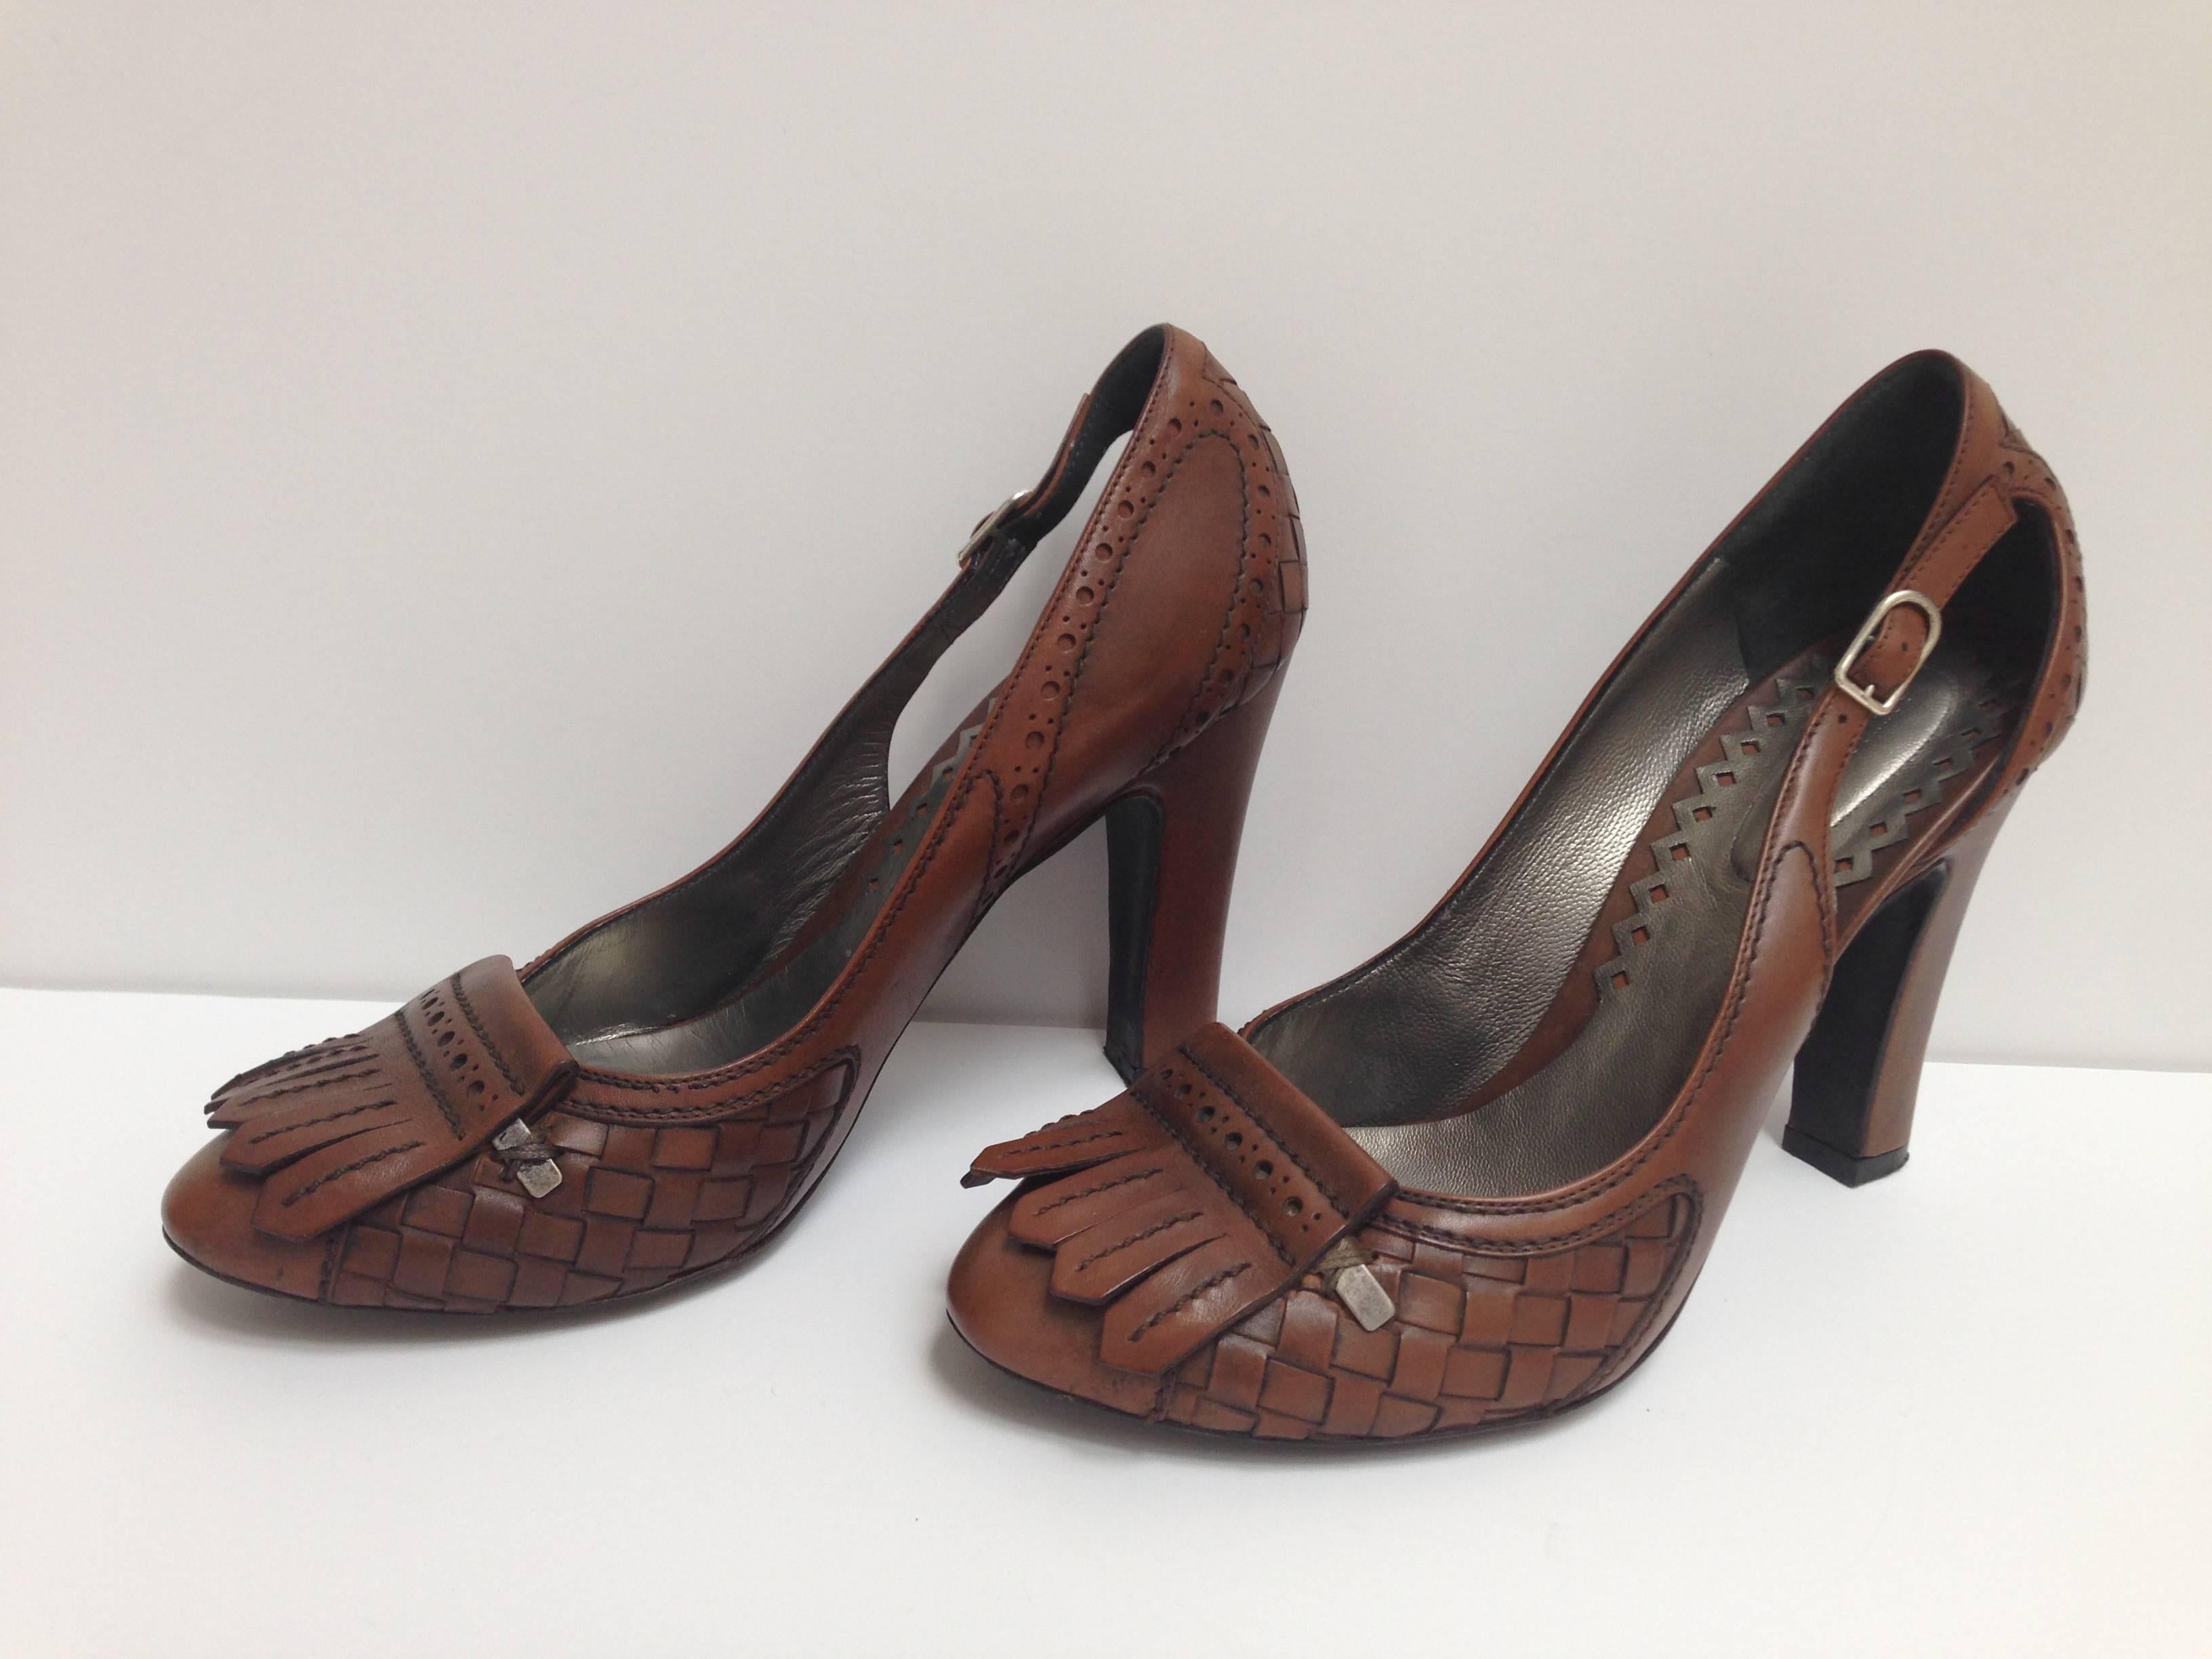 Bottega Veneta Brown Leather Fringe Pumps 
Size: 37.5 ITA - 7.5 US    Original Retail Price: US $790
These perfect for work pumps by Bottega Veneta are made from brown
leather. The vamps are accented with fringe and perforated detailing.